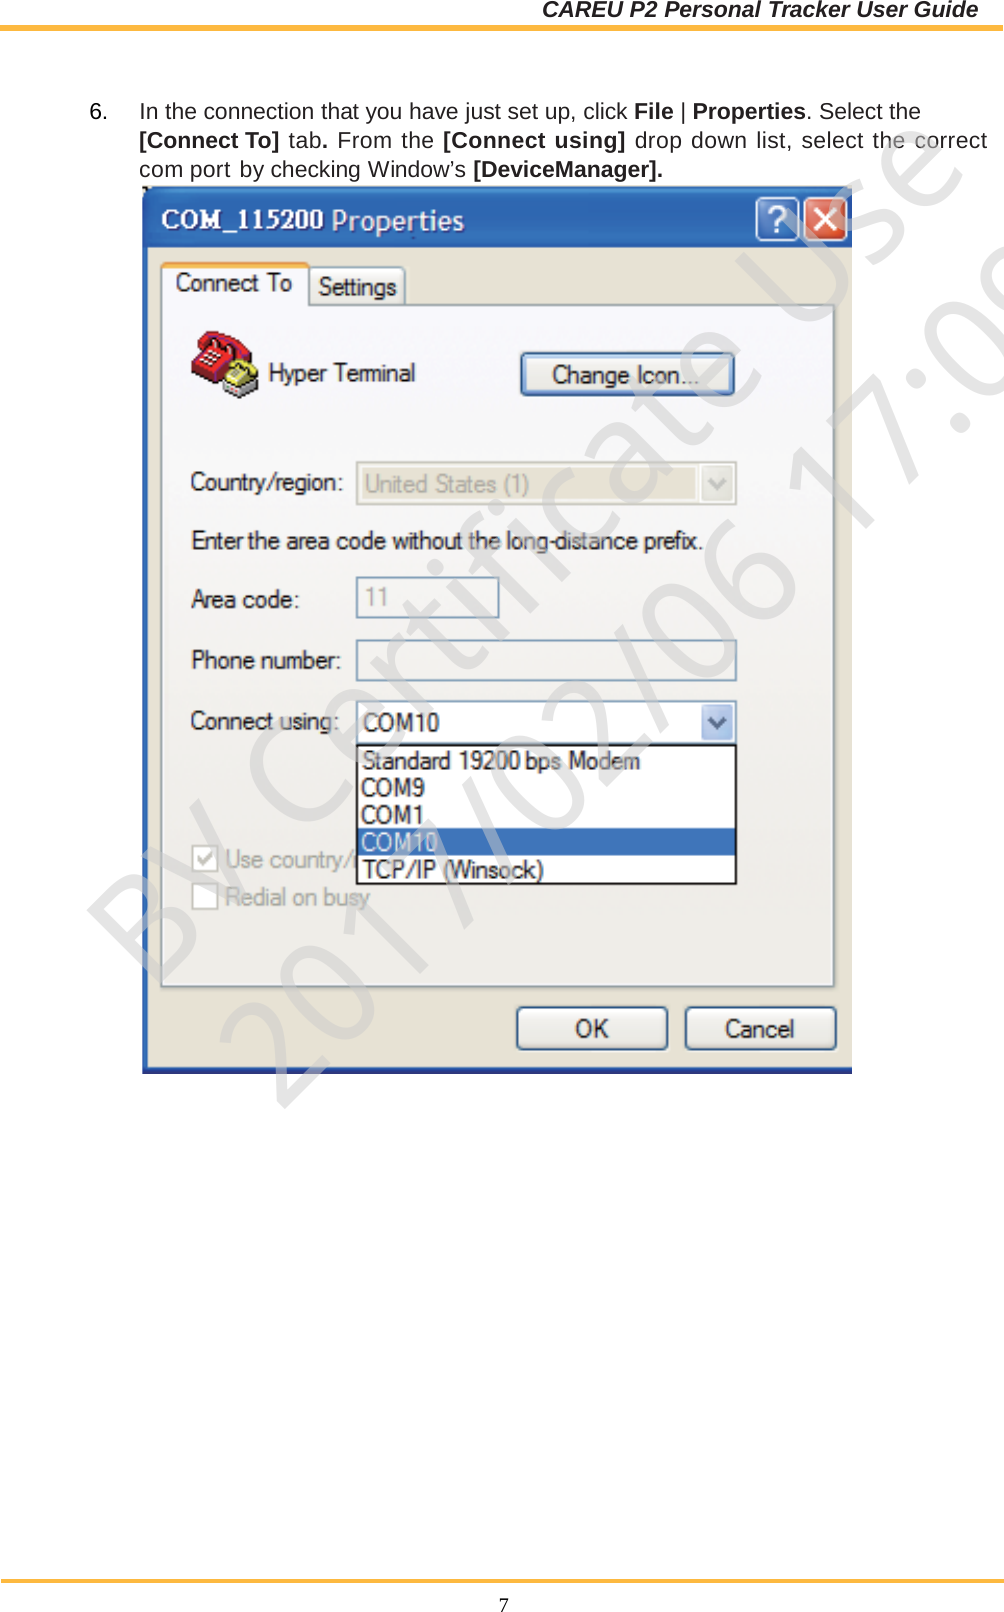 CAREU P2 Personal Tracker User Guide  7  6. In the connection that you have just set up, click File | Properties. Select the [Connect To] tab. From the [Connect using] drop down list, select the correct com port by checking Window’s [DeviceManager].                    BV Certificate Use2017/02/06 17:09